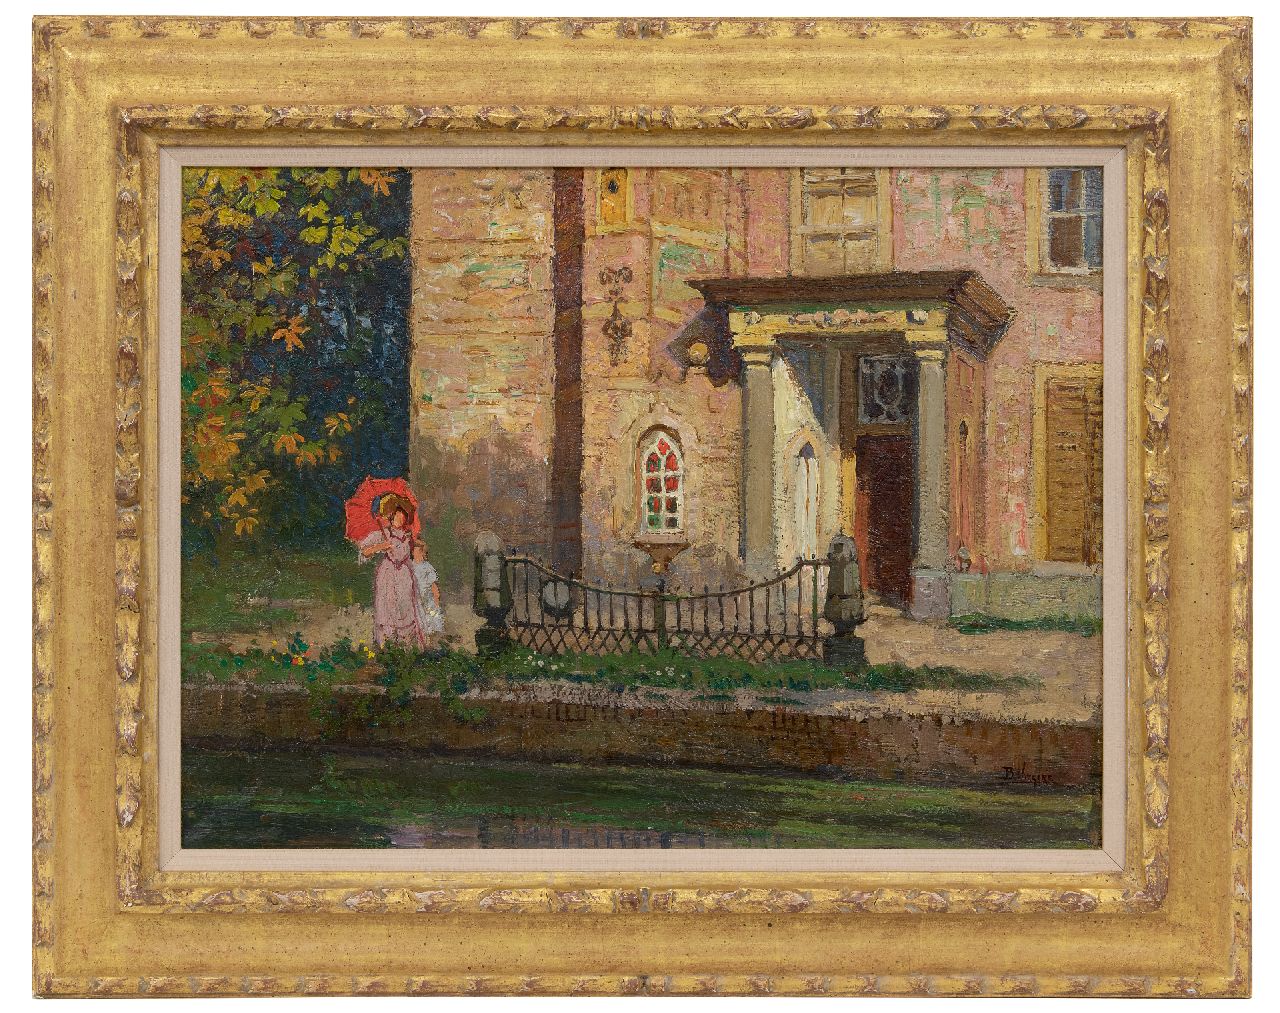 Viegers B.P.  | Bernardus Petrus 'Ben' Viegers | Paintings offered for sale | het Huis te Hoorn in Rijswijk with a lady and child, oil on canvas 37.3 x 50.0 cm, signed l.r.